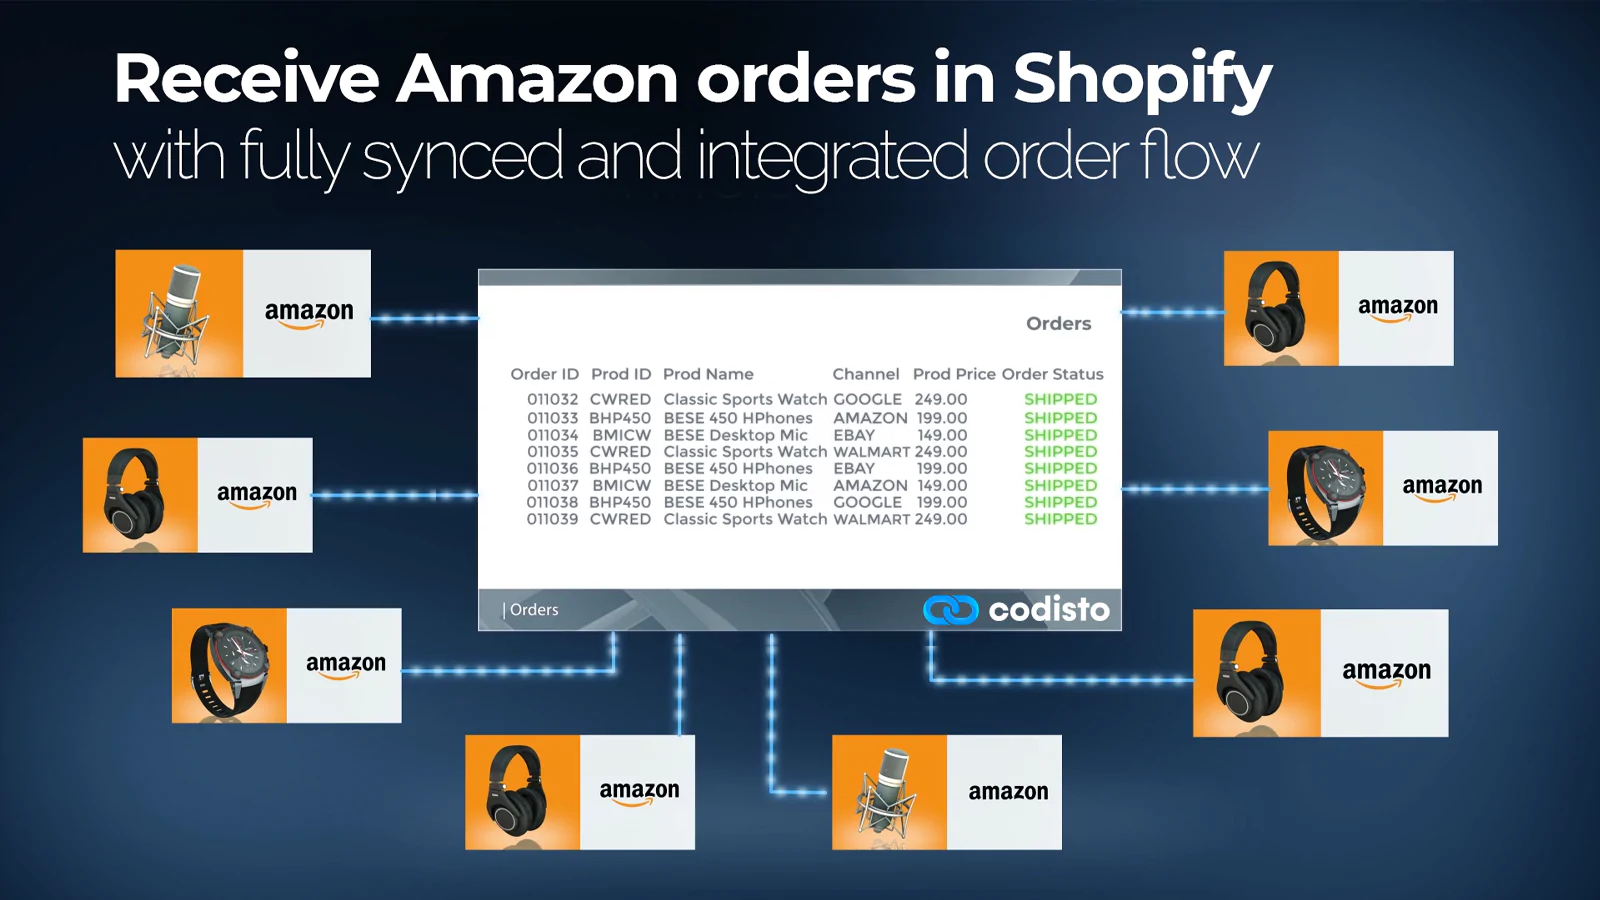 Receive Amazon orders in Shopify